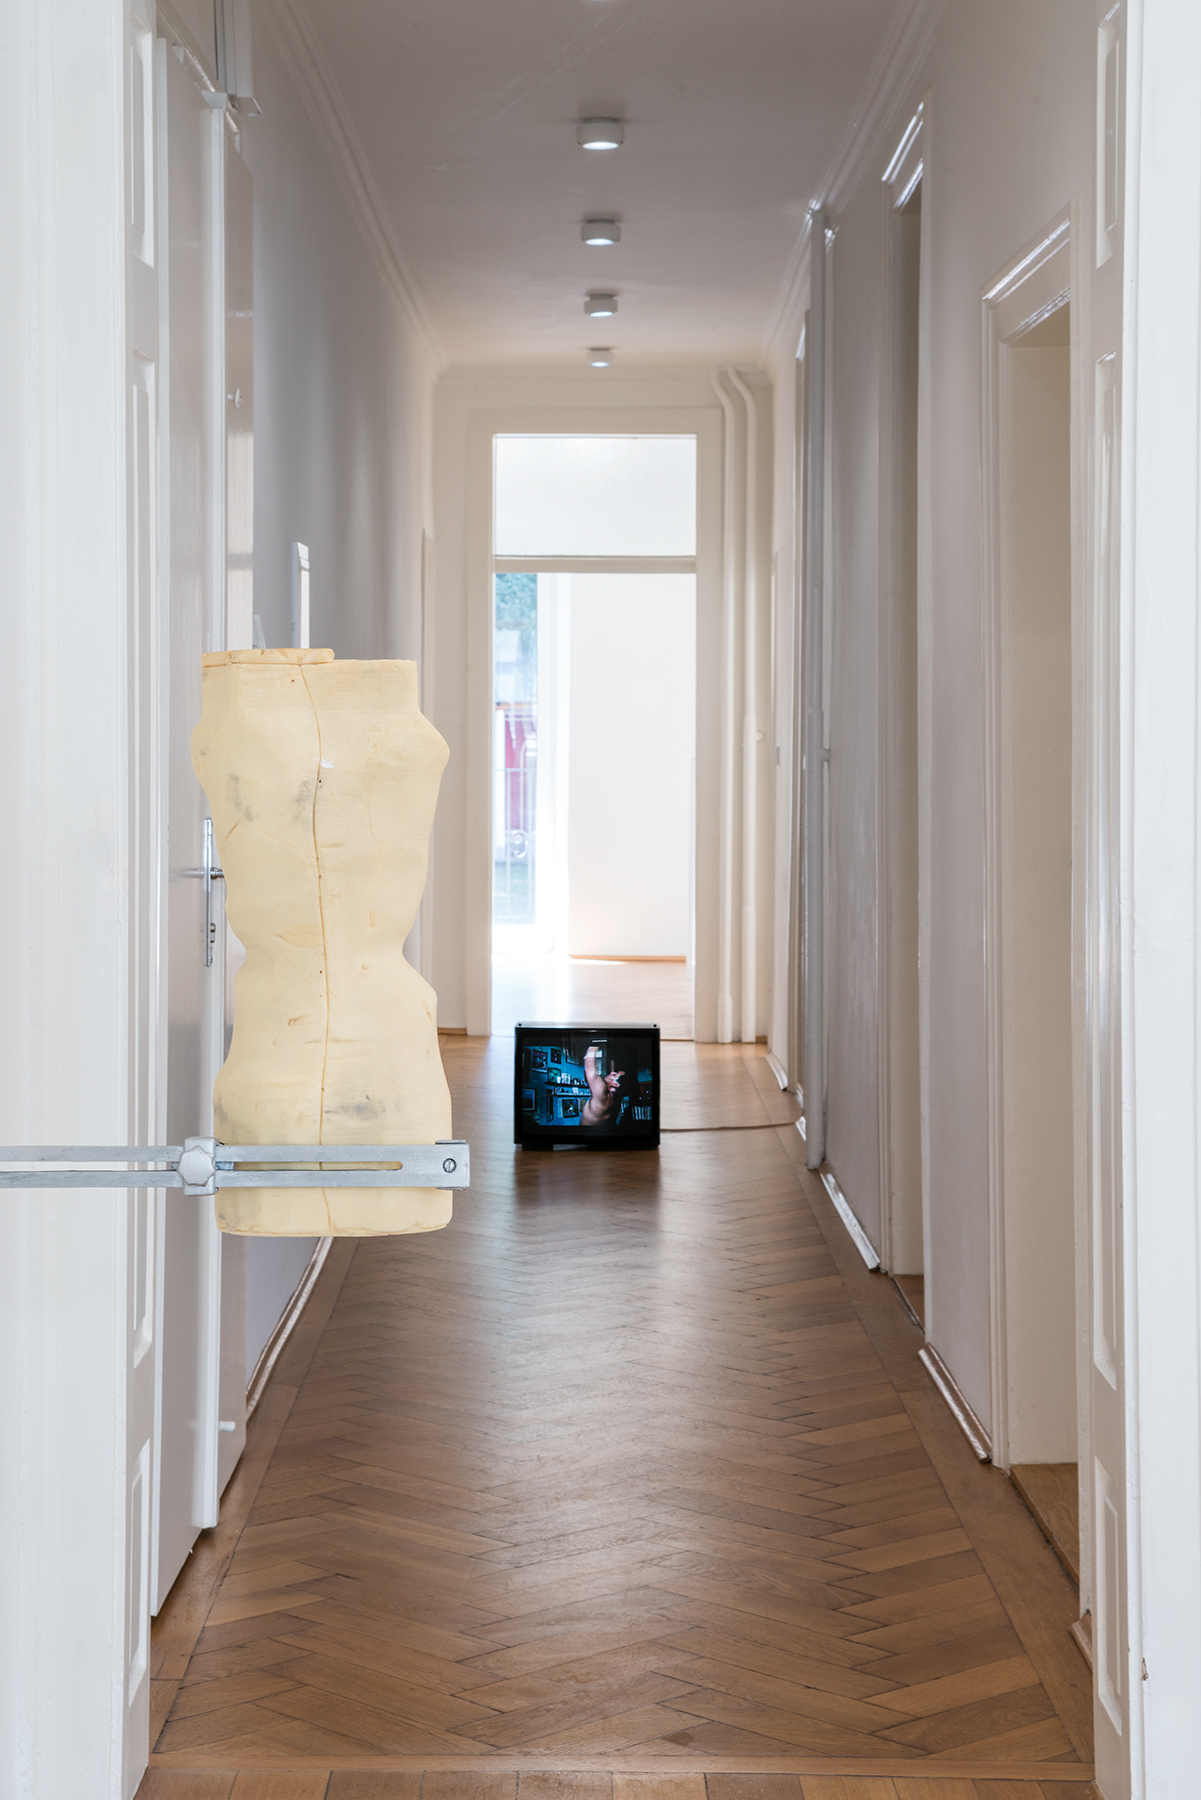 Installation view "The world is not like us...", Britta Rettberg, 2020, with works by Berenice Olmedo and Sarah Minter